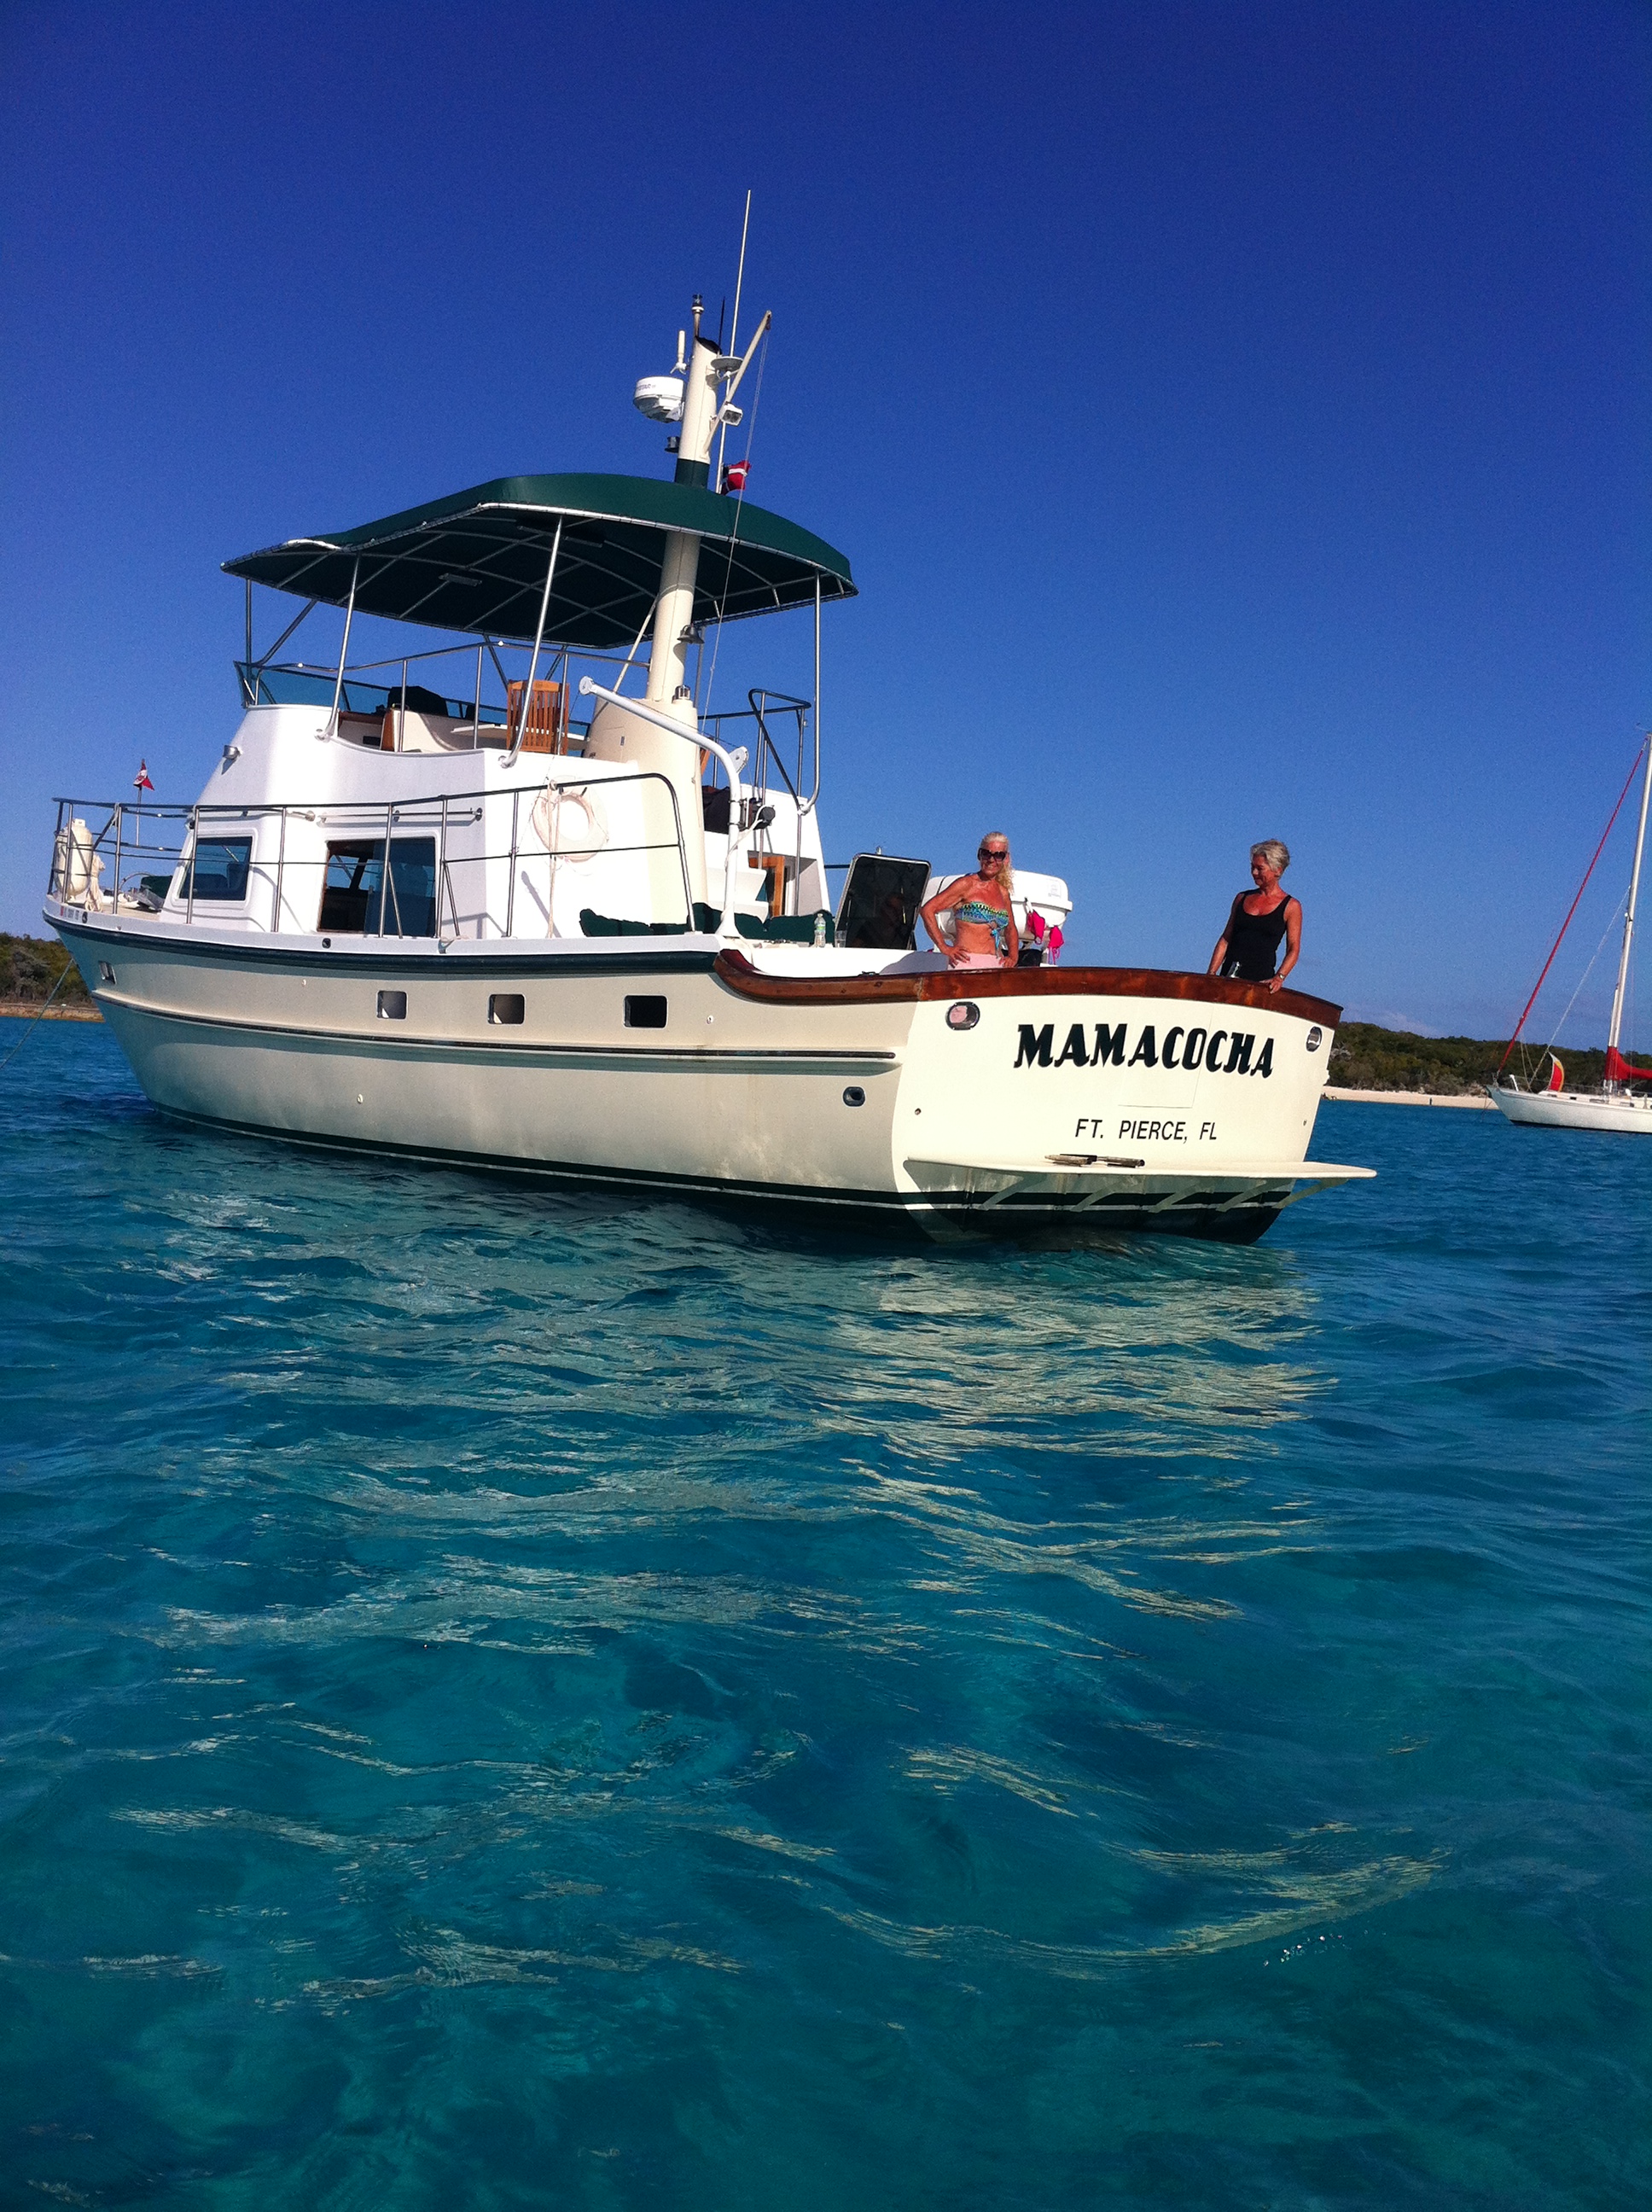 The Bahamas- just 'right over there' where the water is as clear as the air. This could be you. This boat has the range to cross oceans.